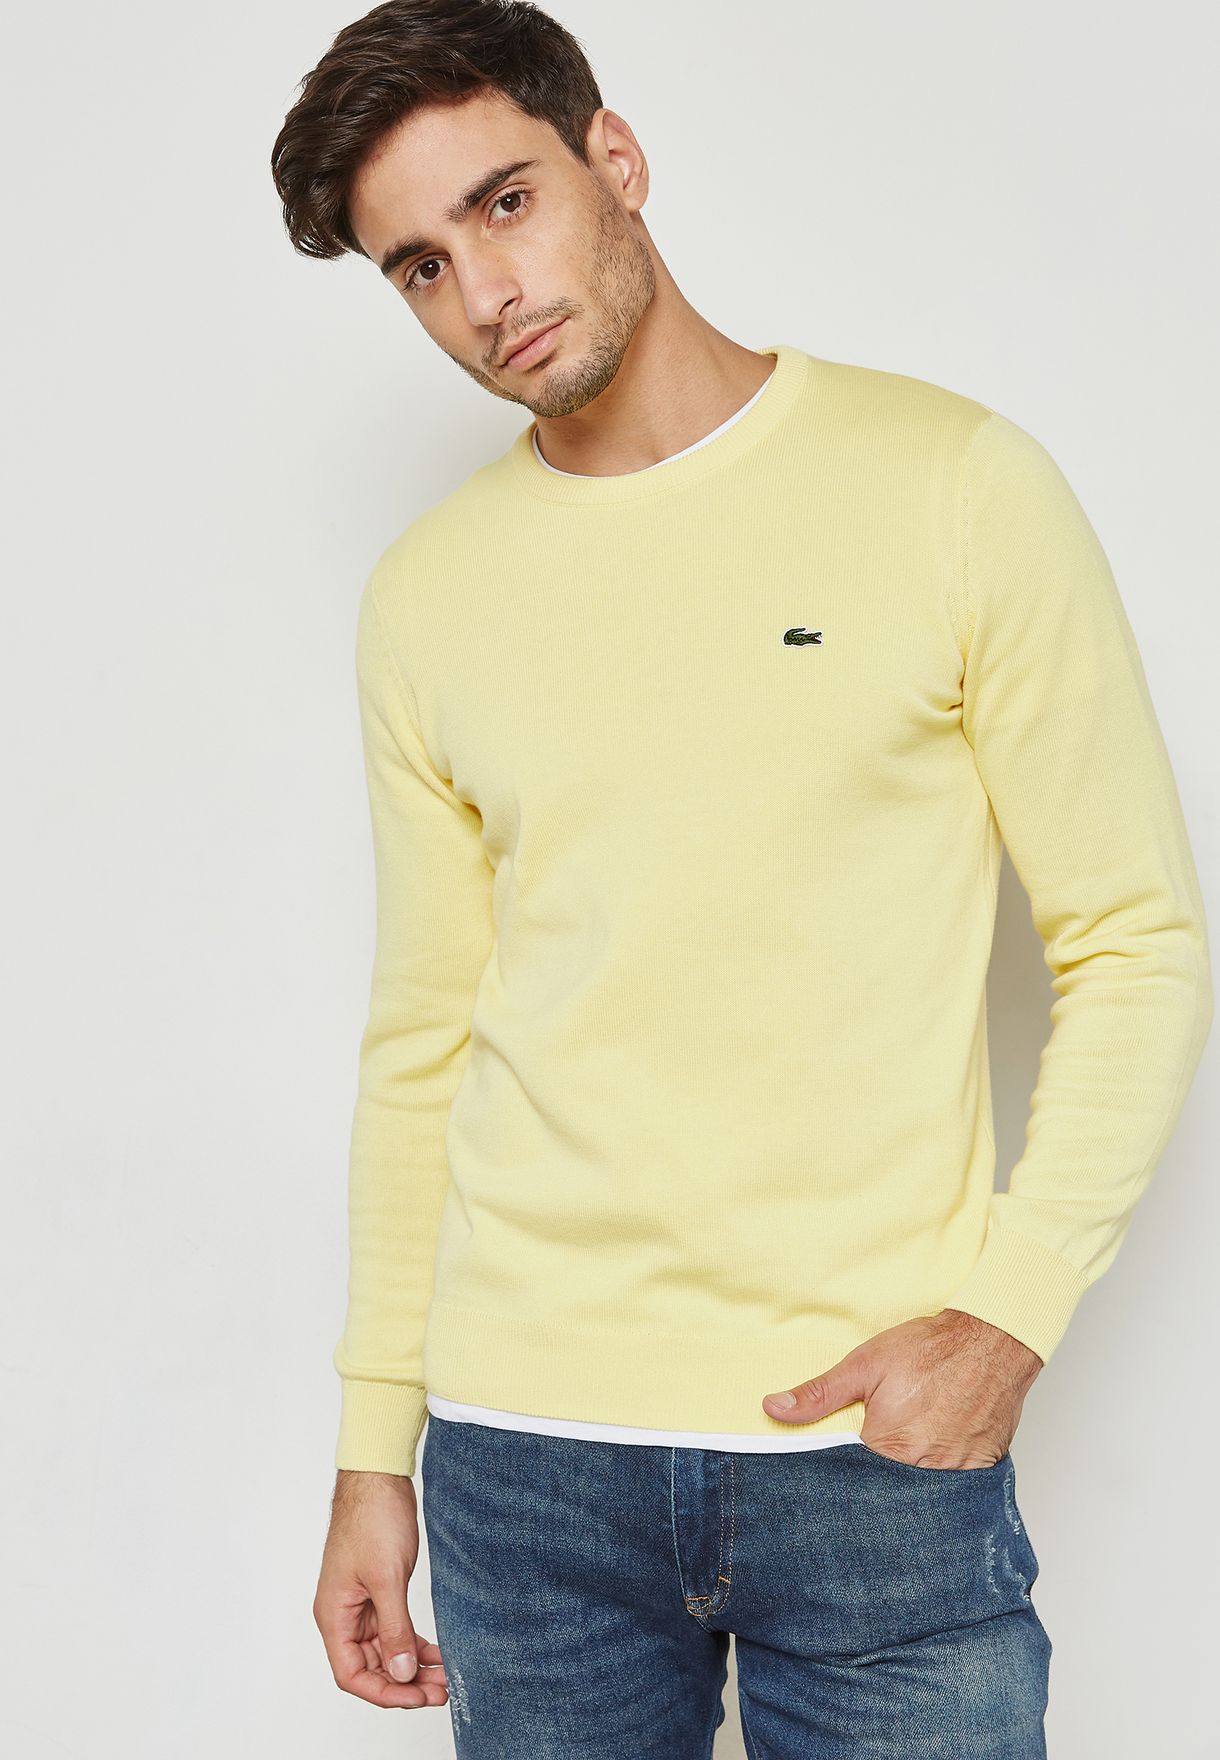 yellow lacoste sweater